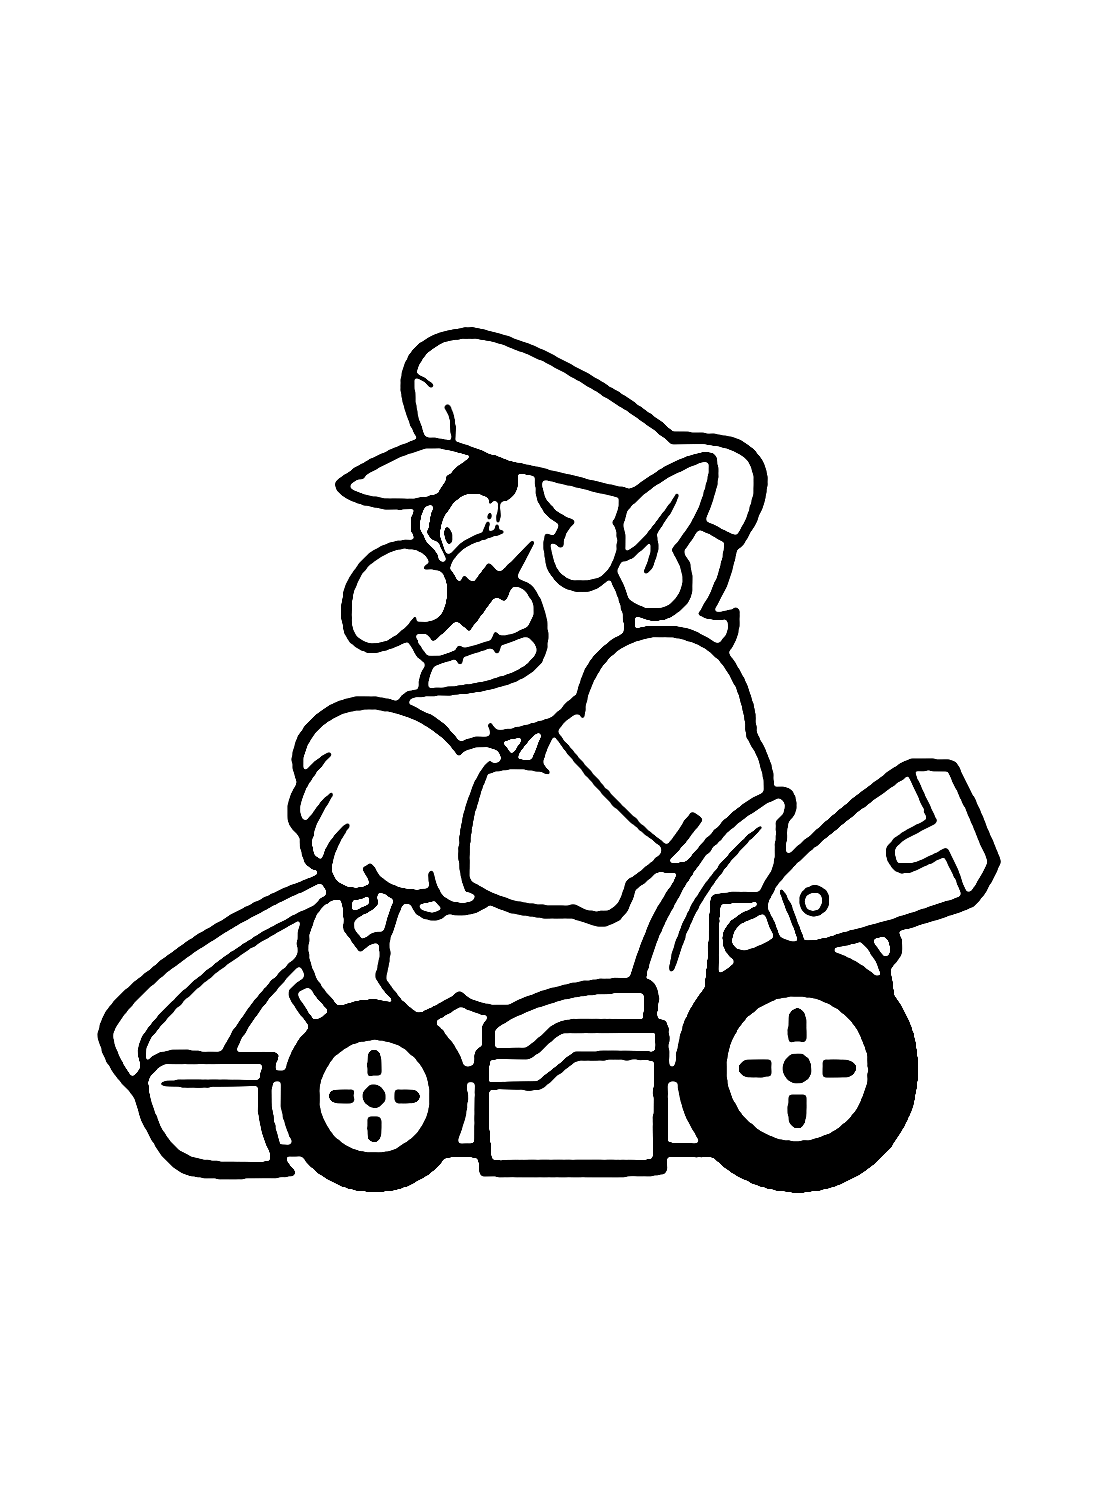 Wario with Car Coloring Pages